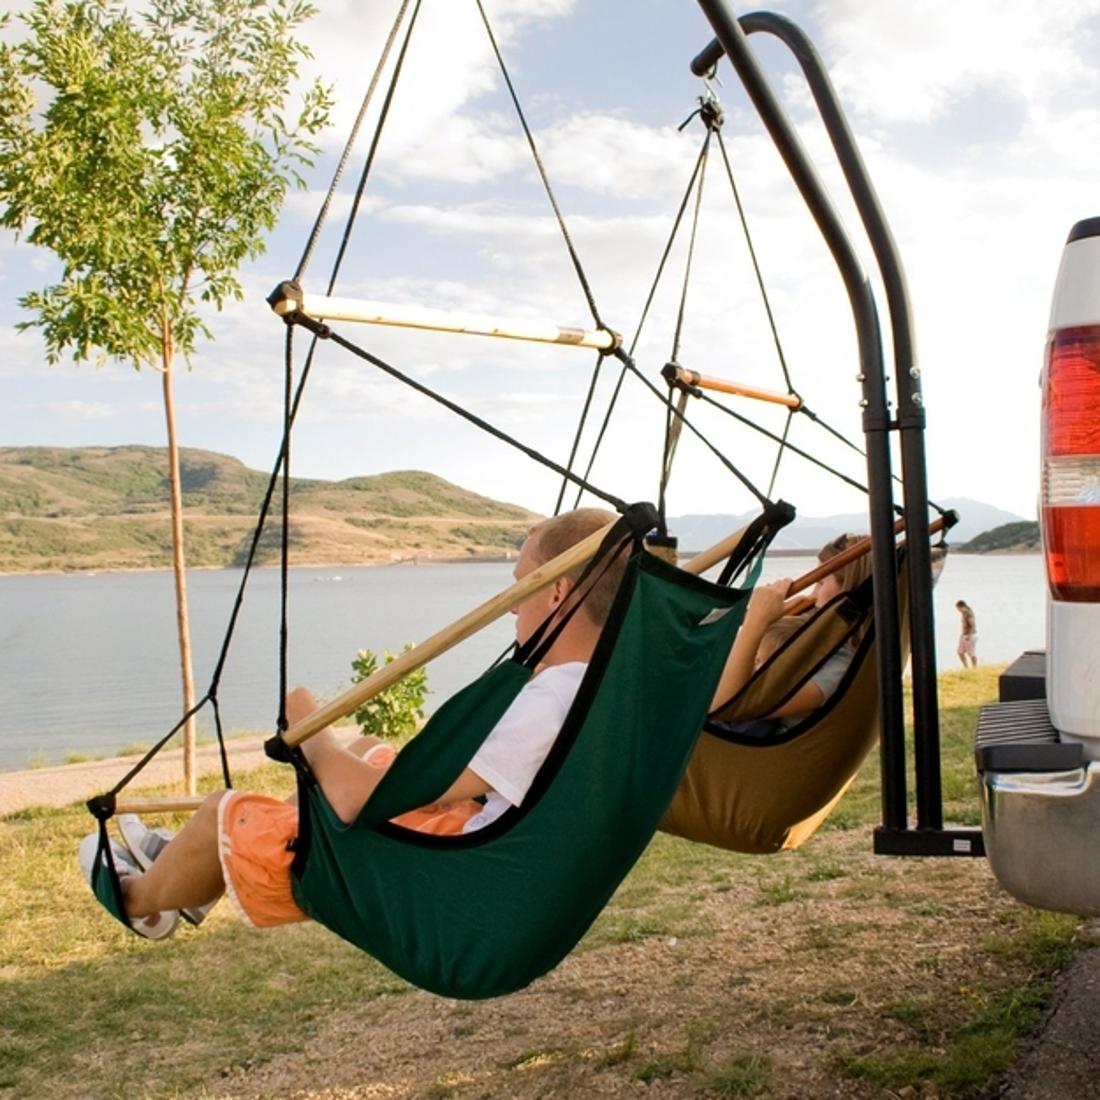 Get these seat hammocks for car camping.